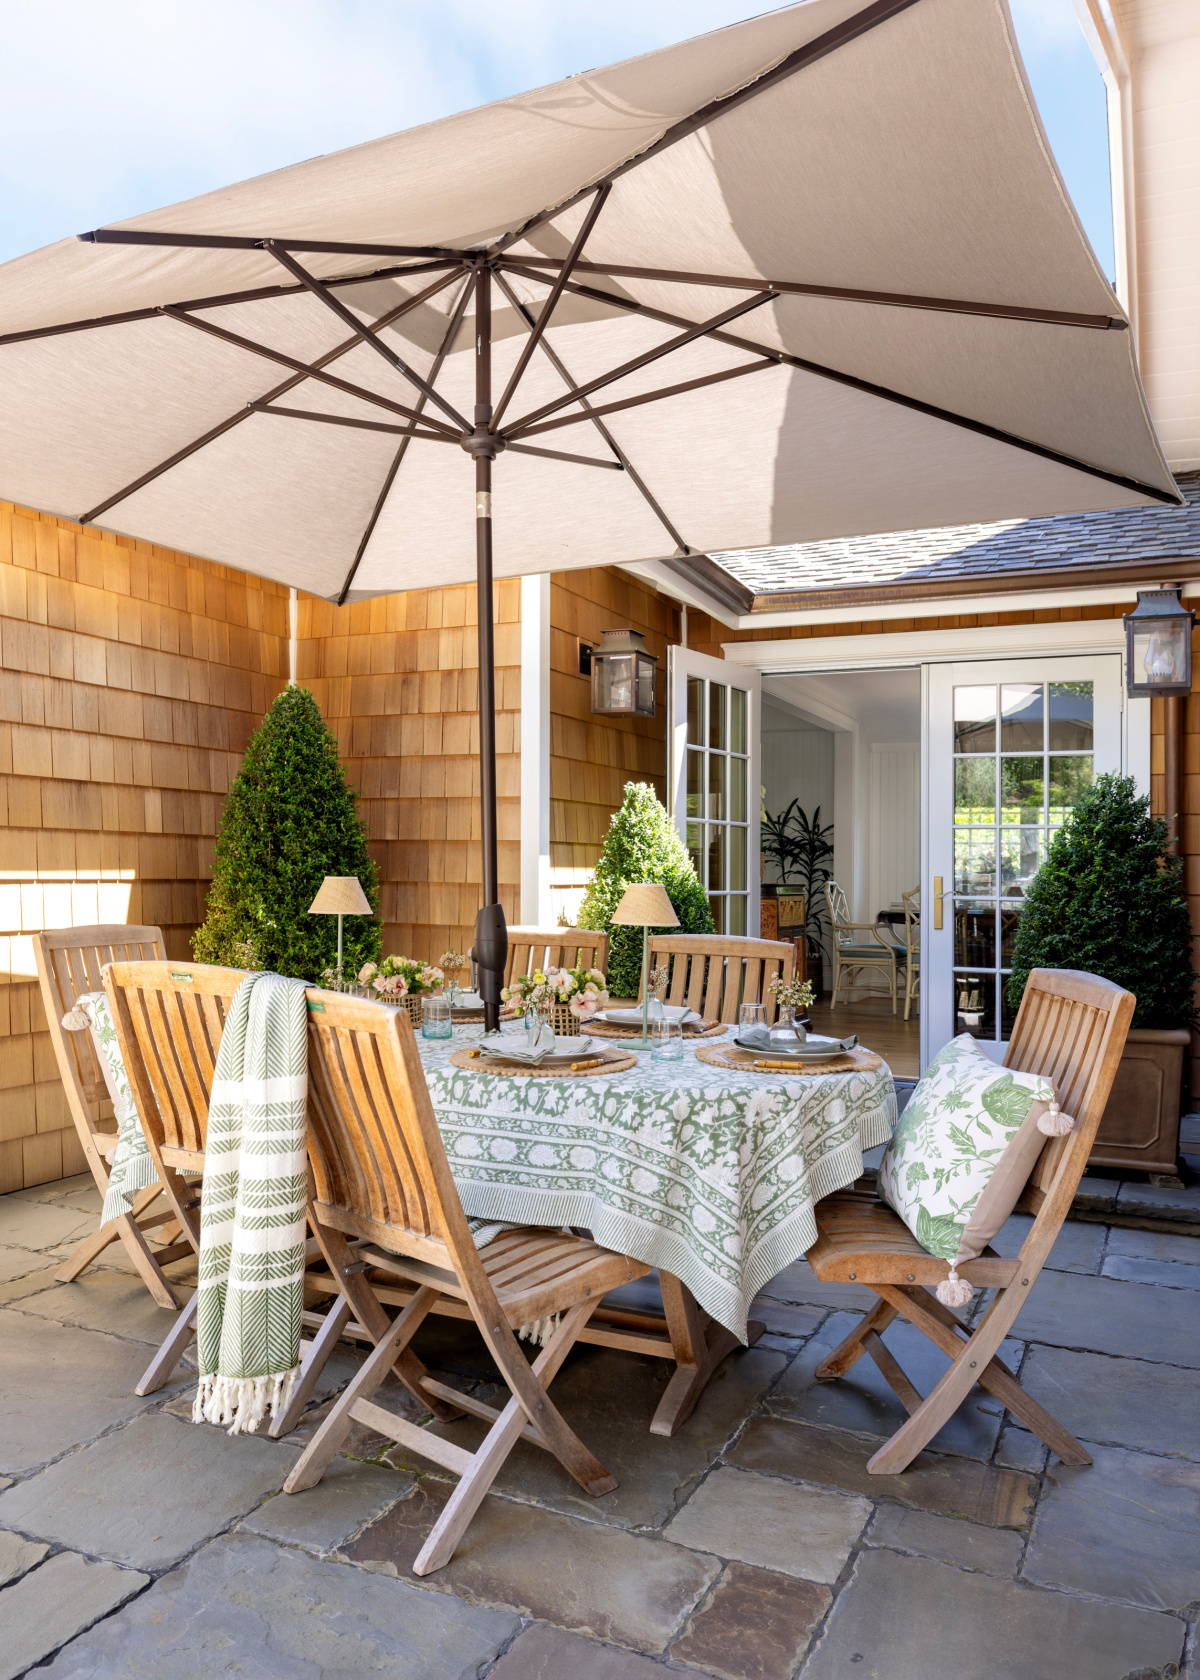 Outdoor patio table setting with umbrella overhead.